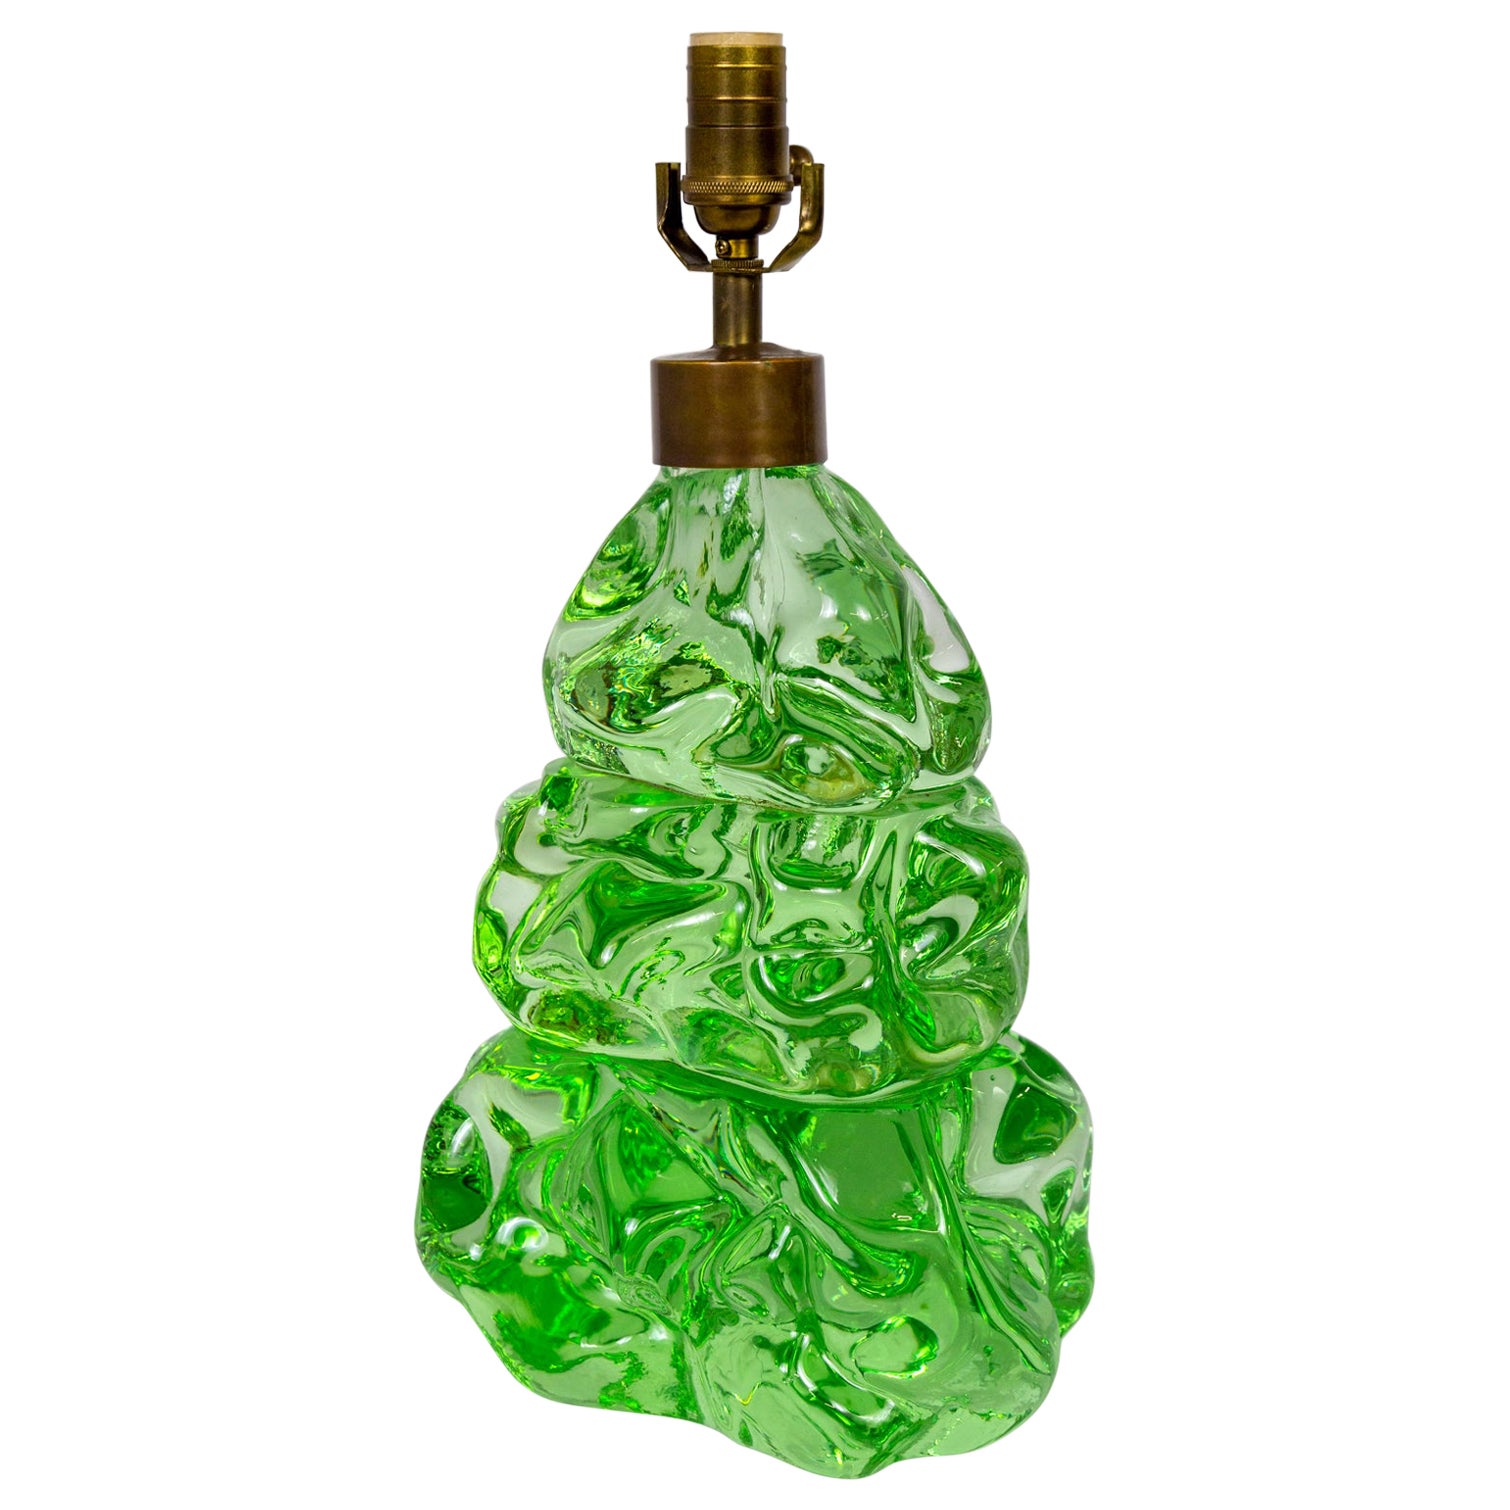 Transparent Green Glass Organic Form Lamp For Sale